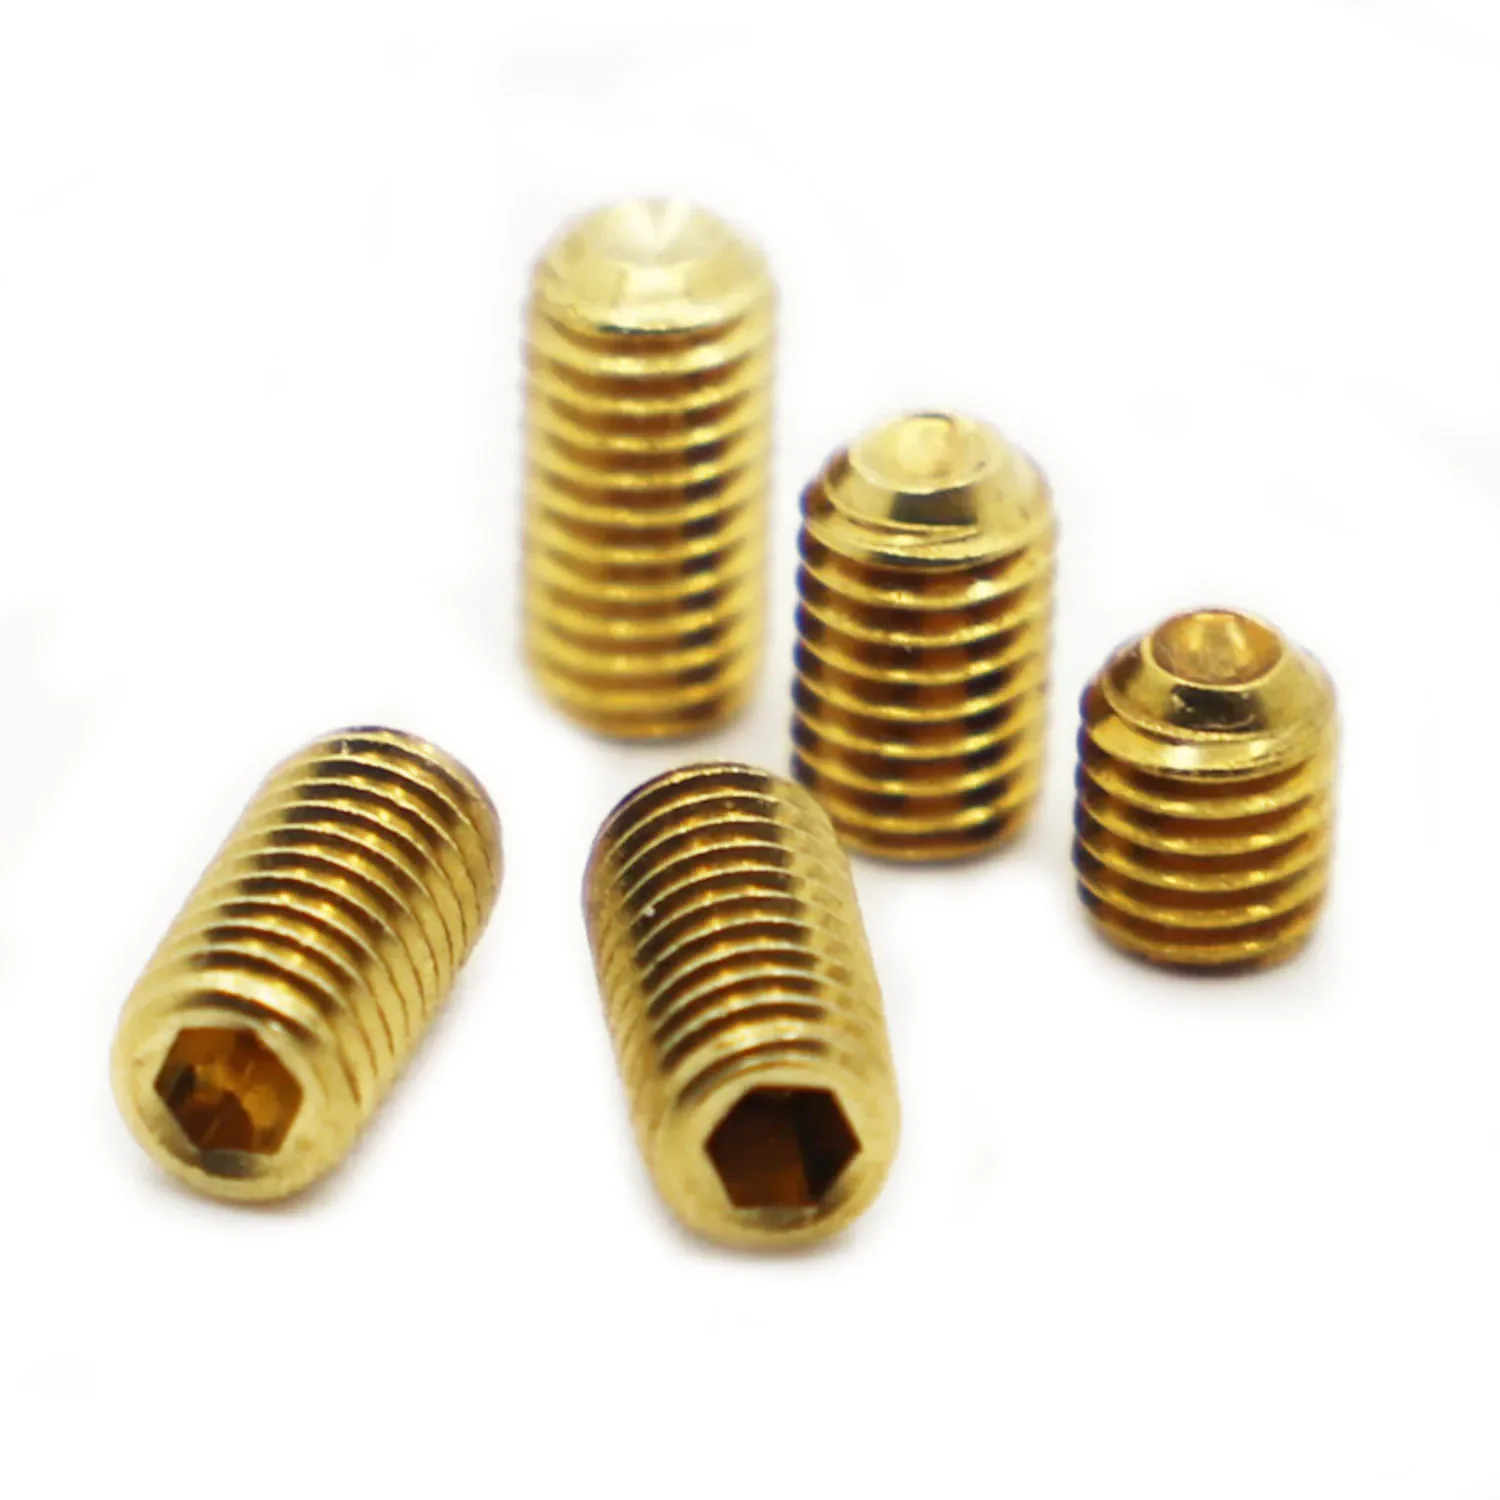 

2-10pcs M2 M2.5 M3 M4 M5 M6 M8 M10 Brass Hexagon Socket Set Screws With Cup Point Grub Screw Bolts DIN916